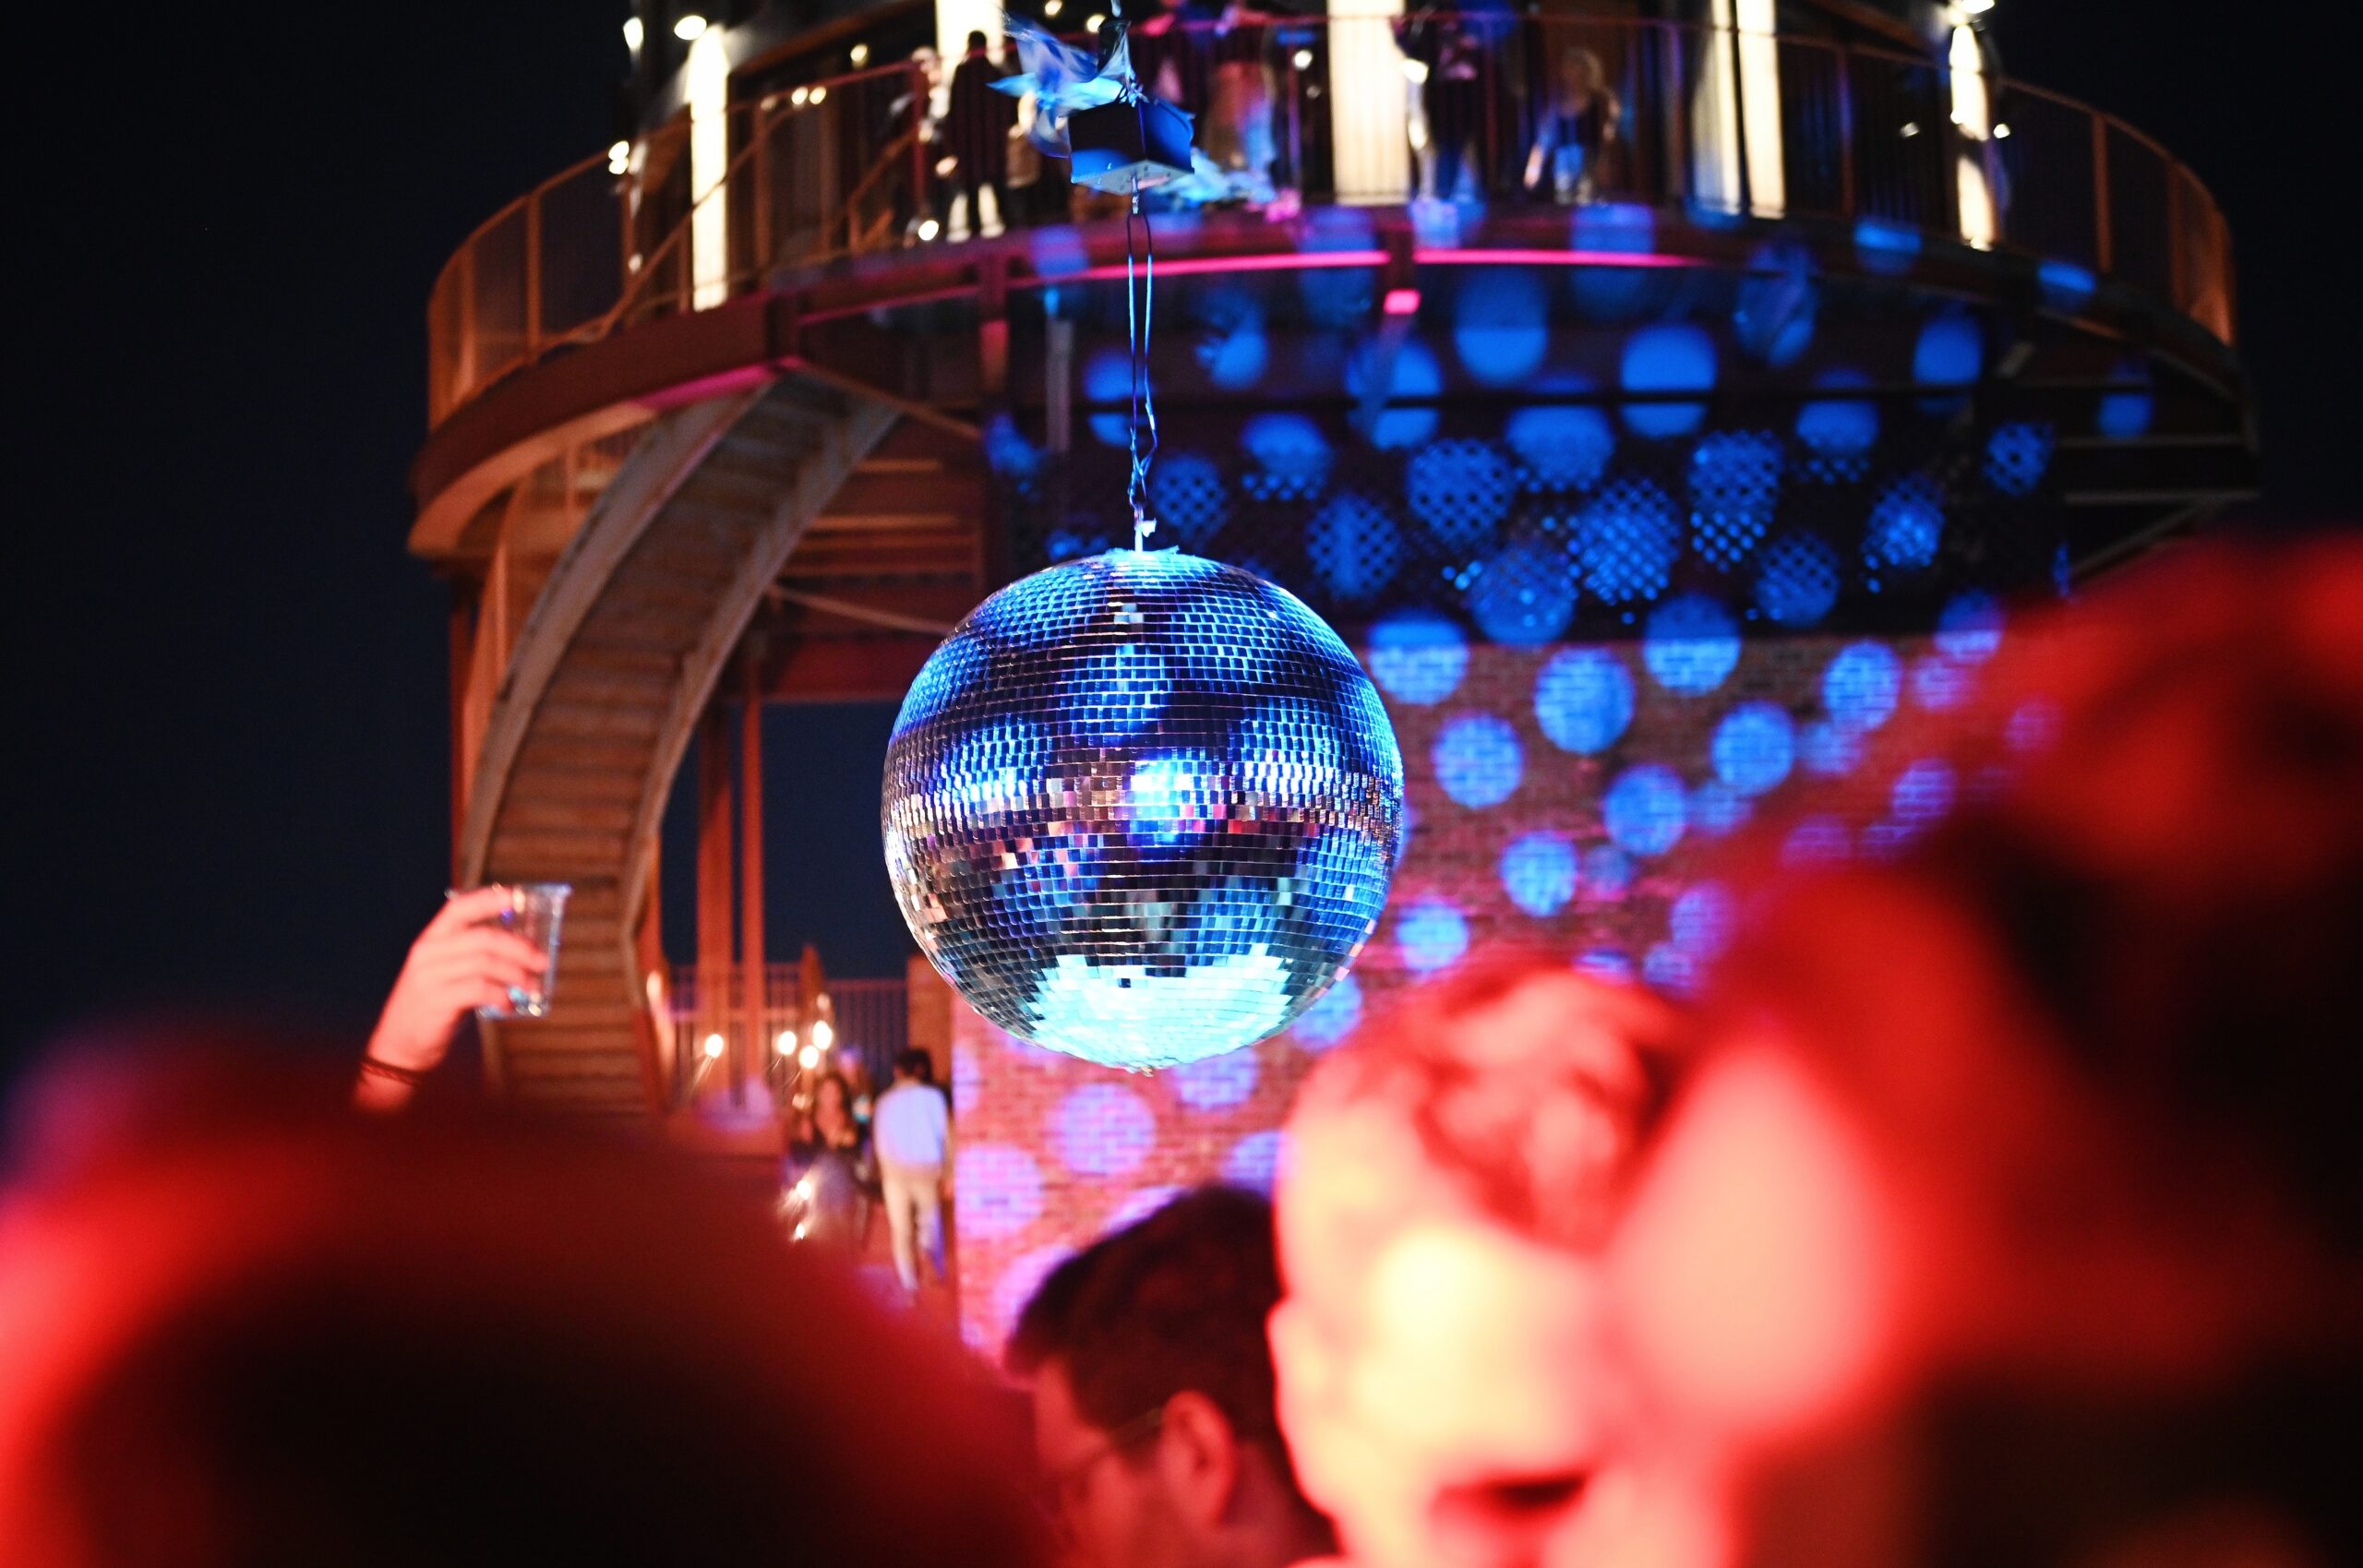 A reflective disco ball hangs in a crowded party scene with colorful lights. A person holds a drink to the left, and an elevated platform is in the background with people on it.